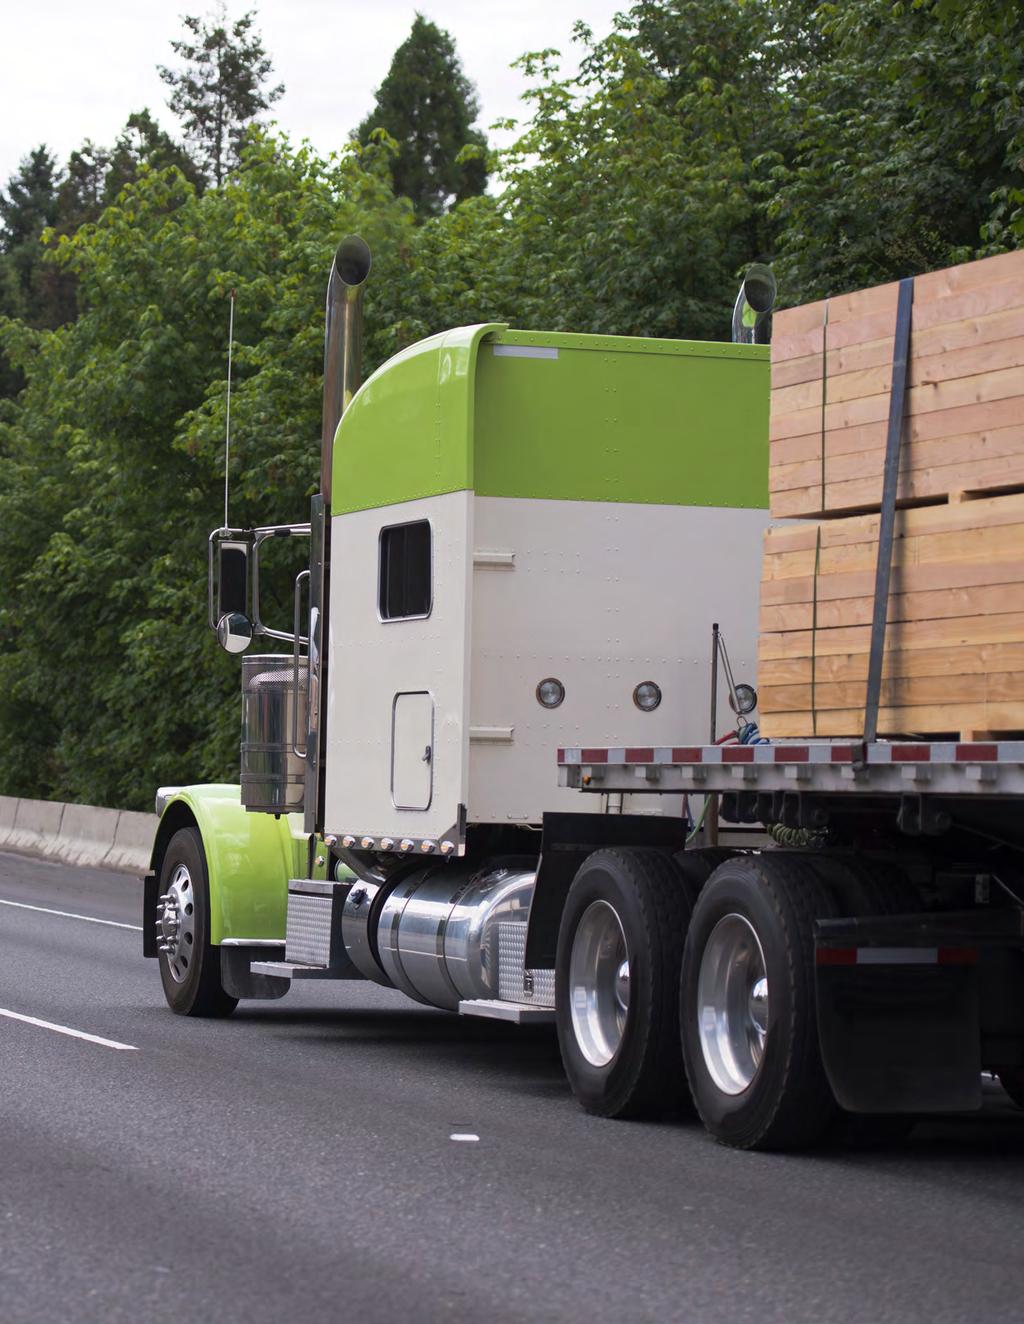 Navigating a fluctuating flatbed market. In April 2018, flatbed load-to-truck peaked at an all-time high with more than 100 loads per truck on the road.